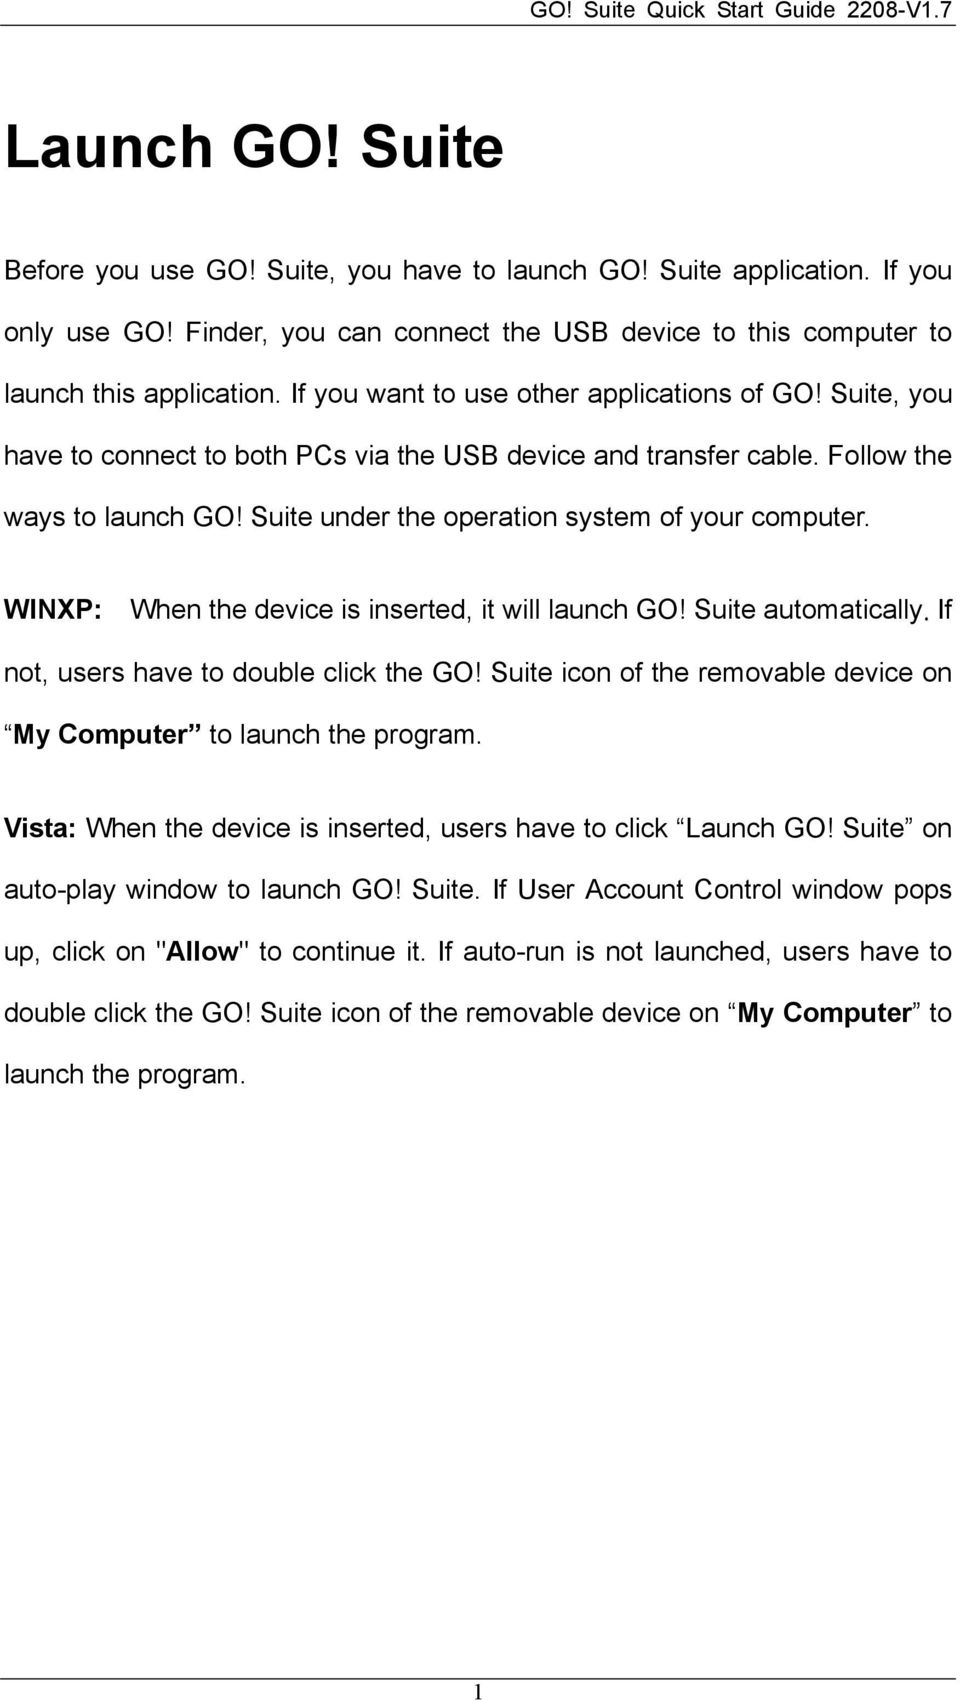 Suite, you have to connect to both PCs via the USB device and transfer cable. Follow the ways to launch GO! Suite under the operation system of your computer.